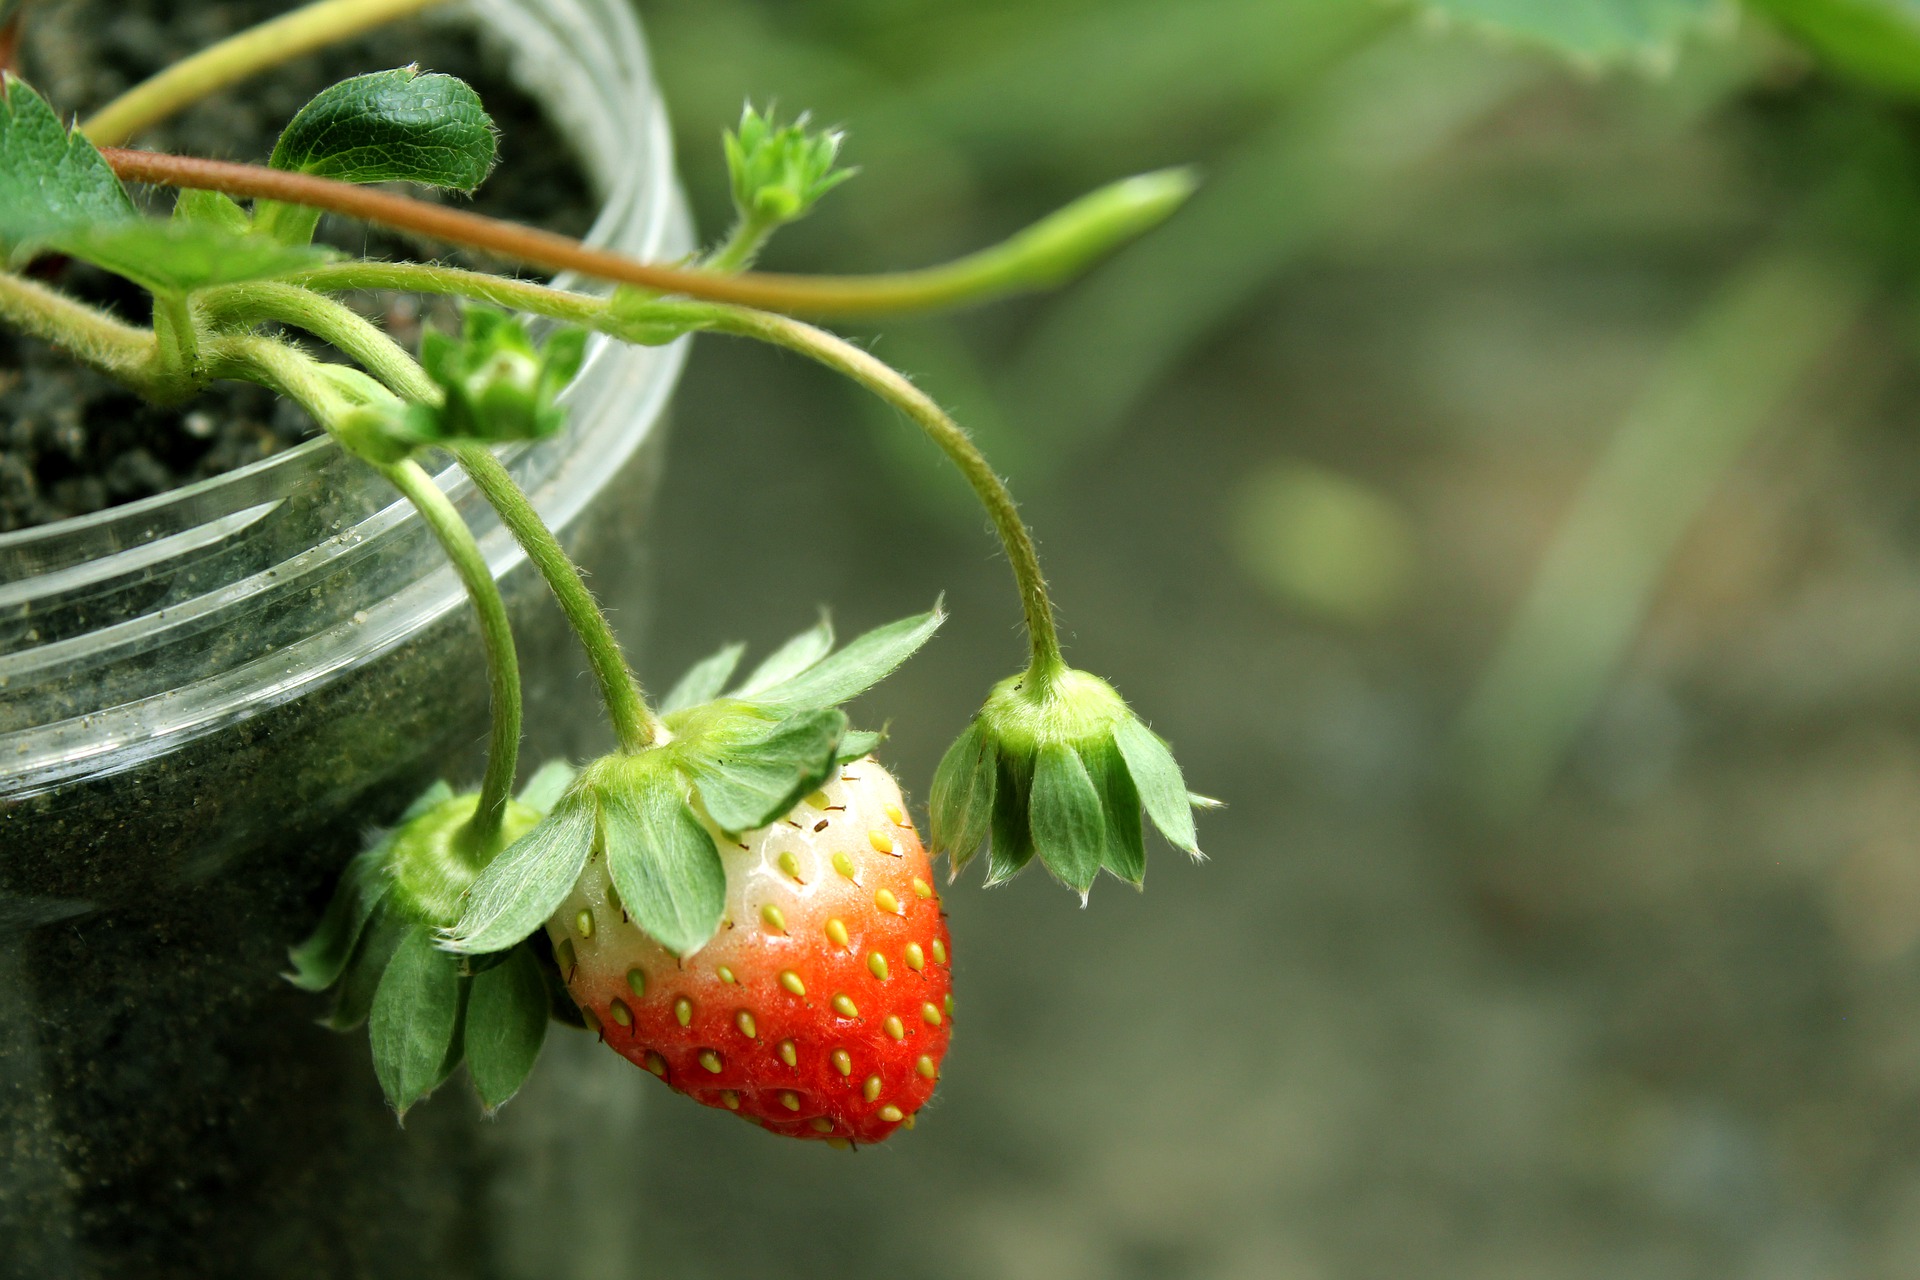 Strawberry planted in a pot